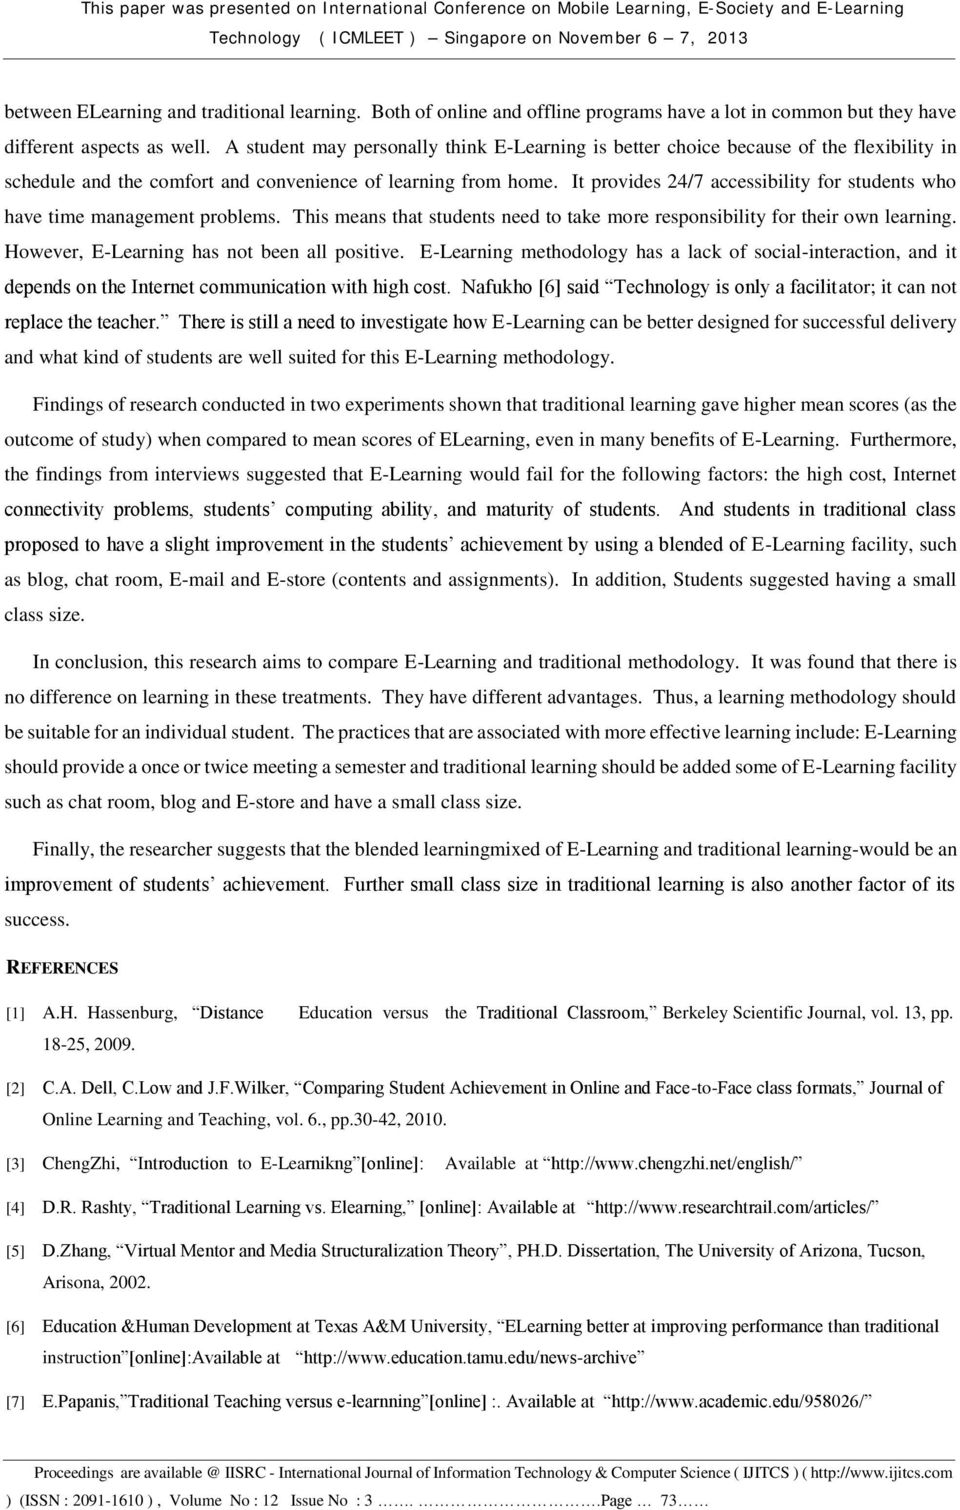 A Comparison Of E Learning And Traditional Learning Experimental